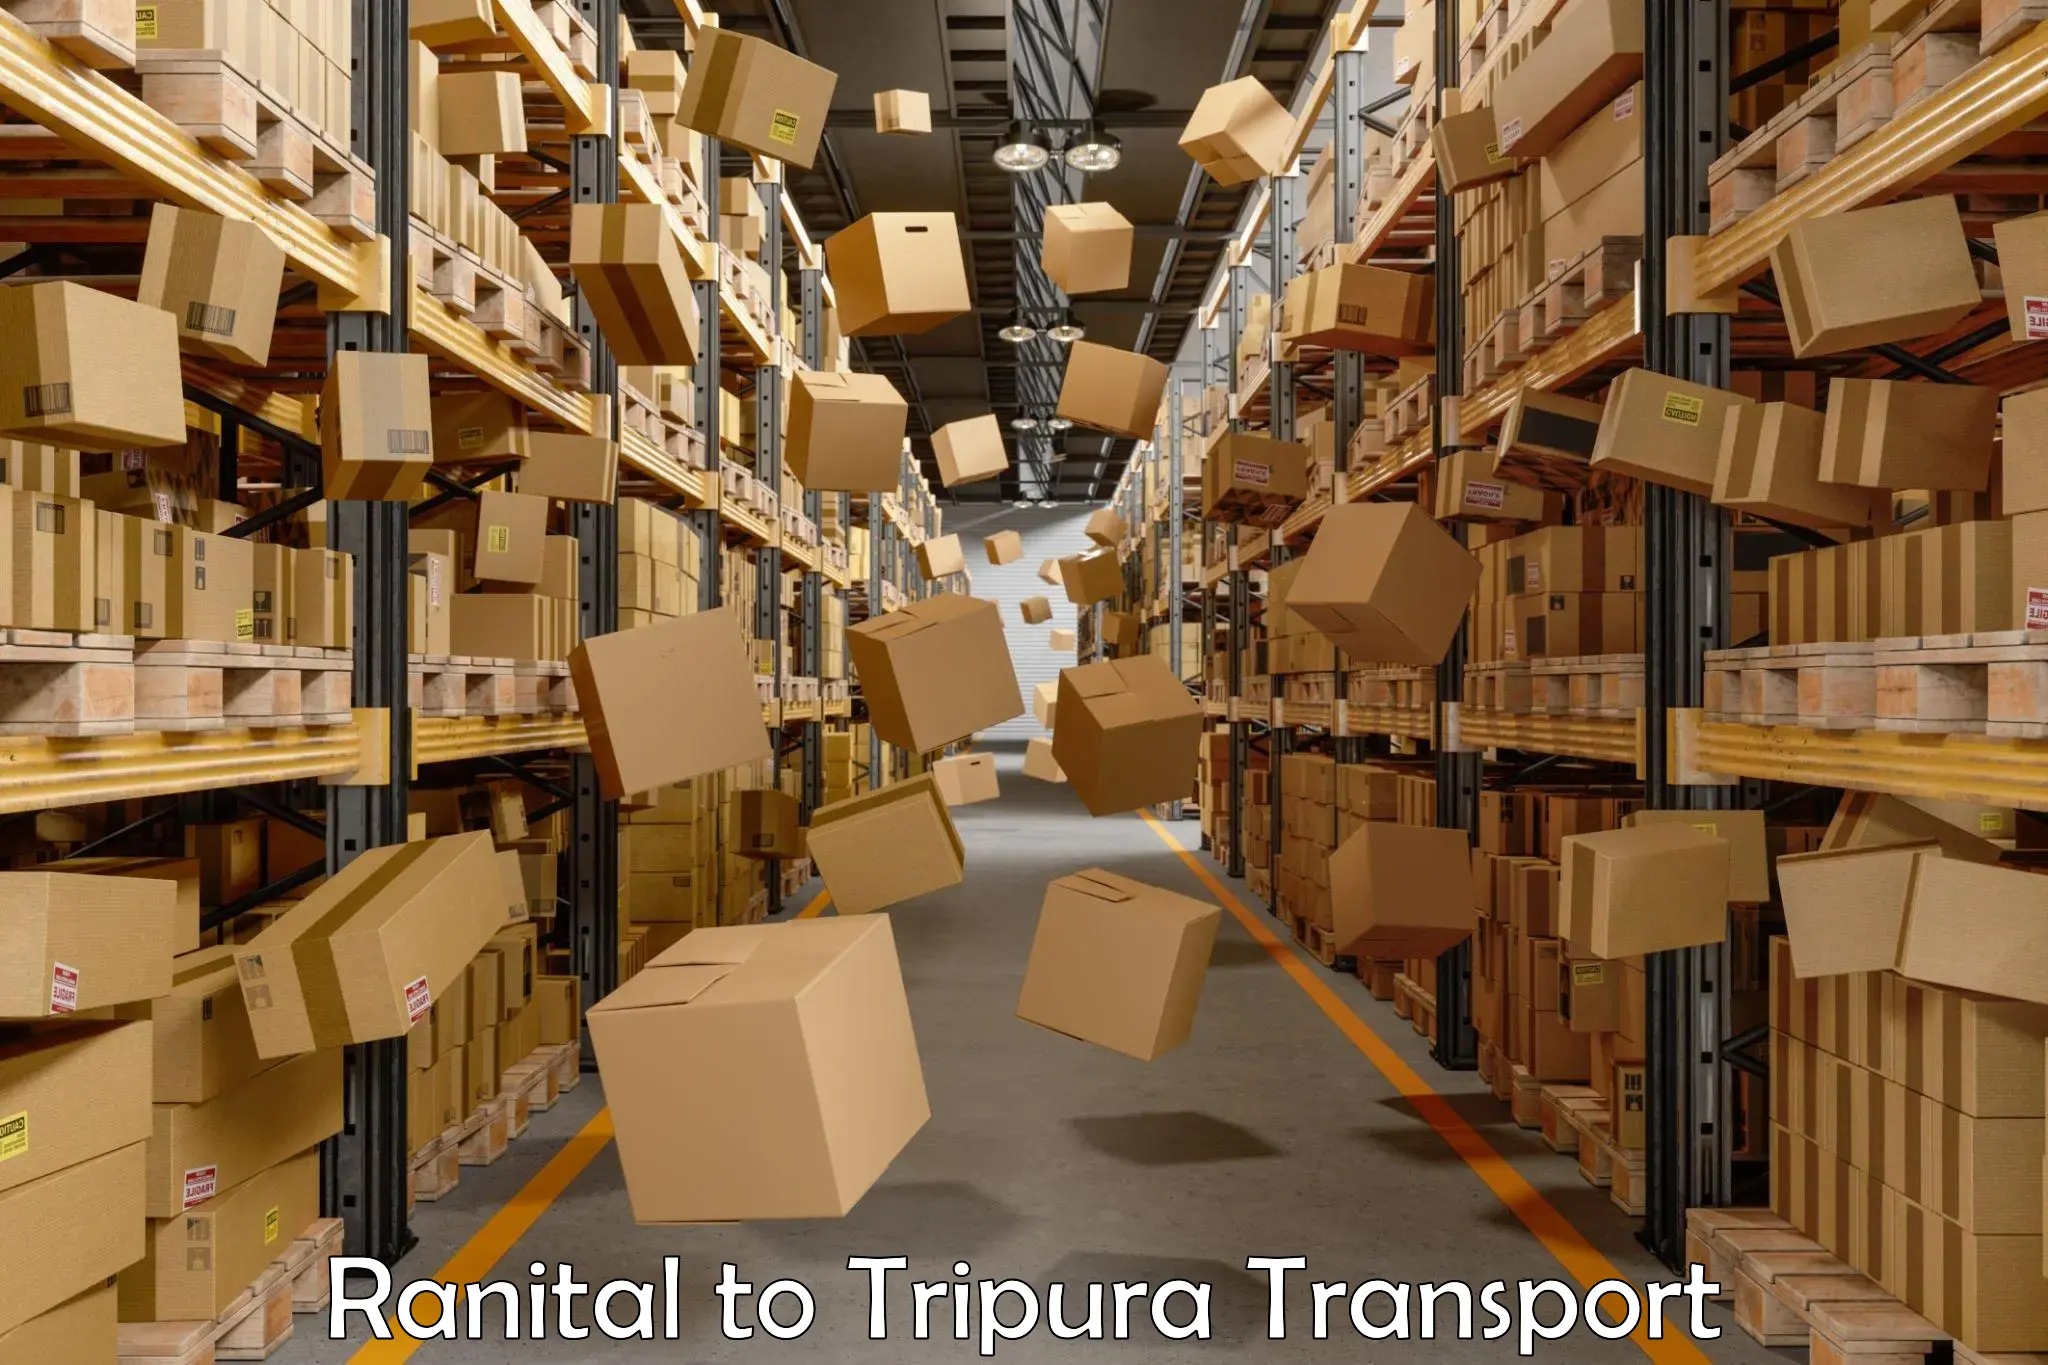 Cargo train transport services in Ranital to Udaipur Tripura